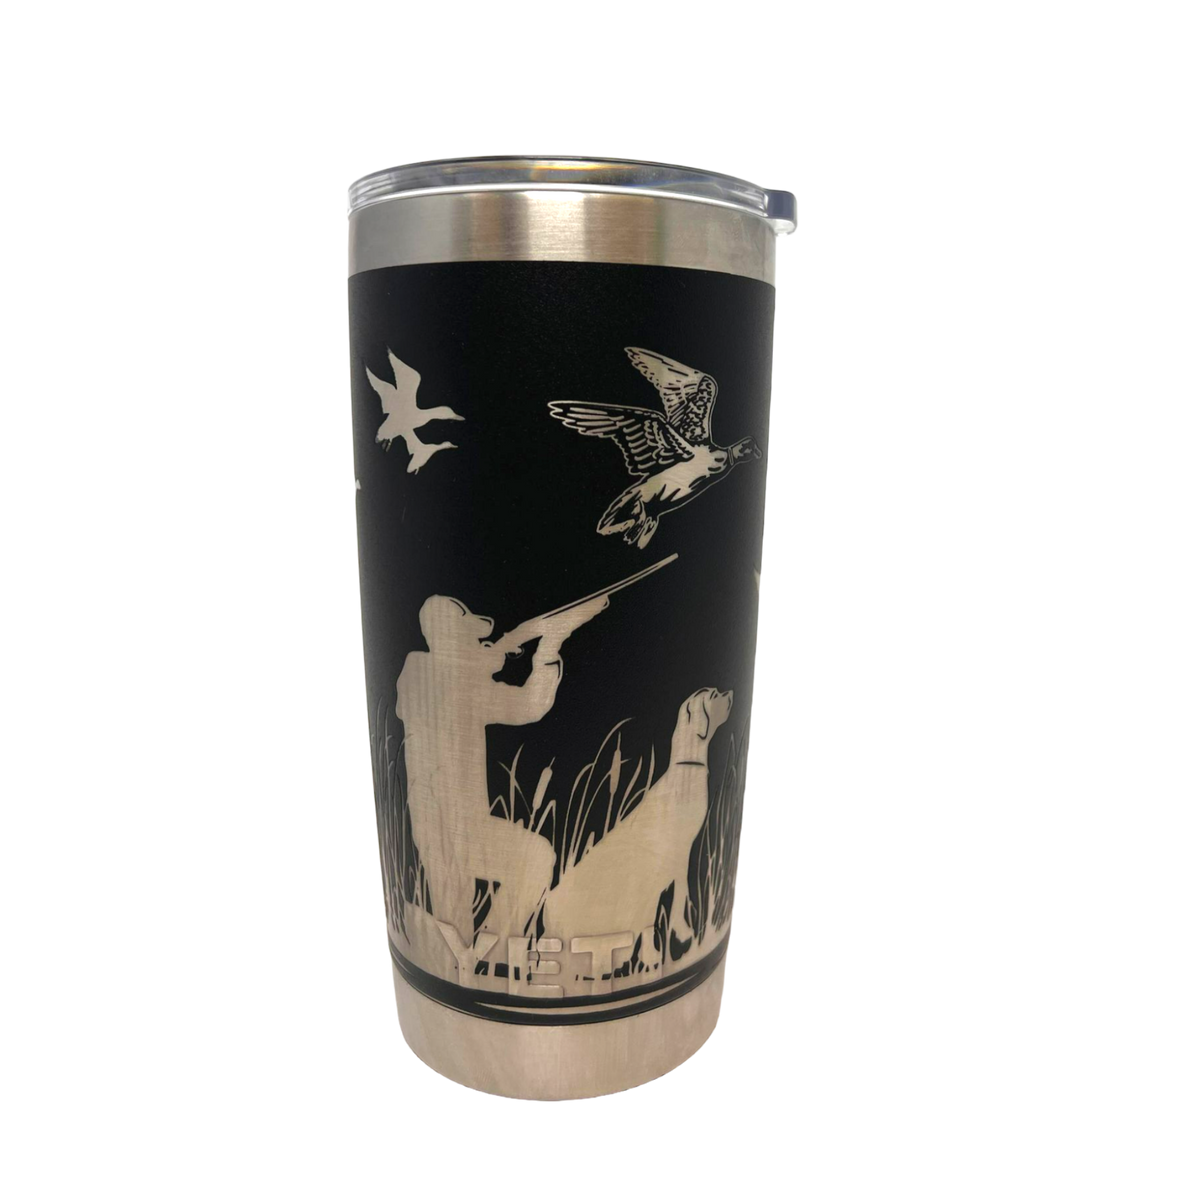 https://cdn.shopify.com/s/files/1/0606/5497/7184/products/wind-river-outpost-duck-hunting-yeti-back_1200x.png?v=1679171654